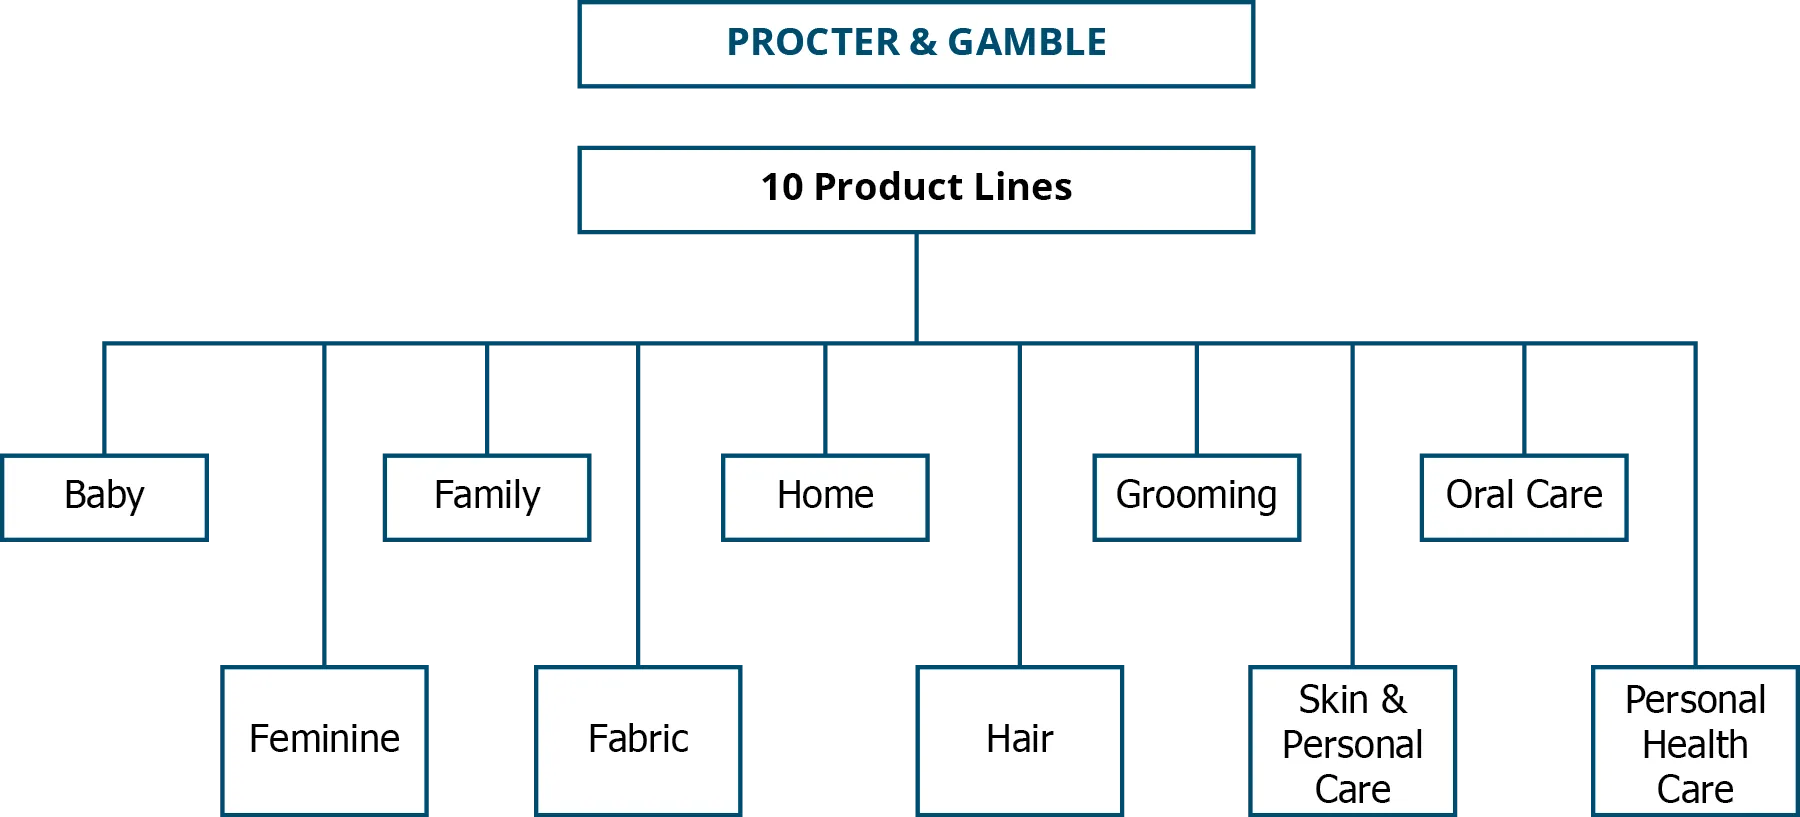 Organizational chart of Procter & Gamble showing the 10 product lines: Baby, Feminine, Family, Fabric, Home, Hair, Grooming, Skin and Personal Care, Oral Care, and Personal Health Care.